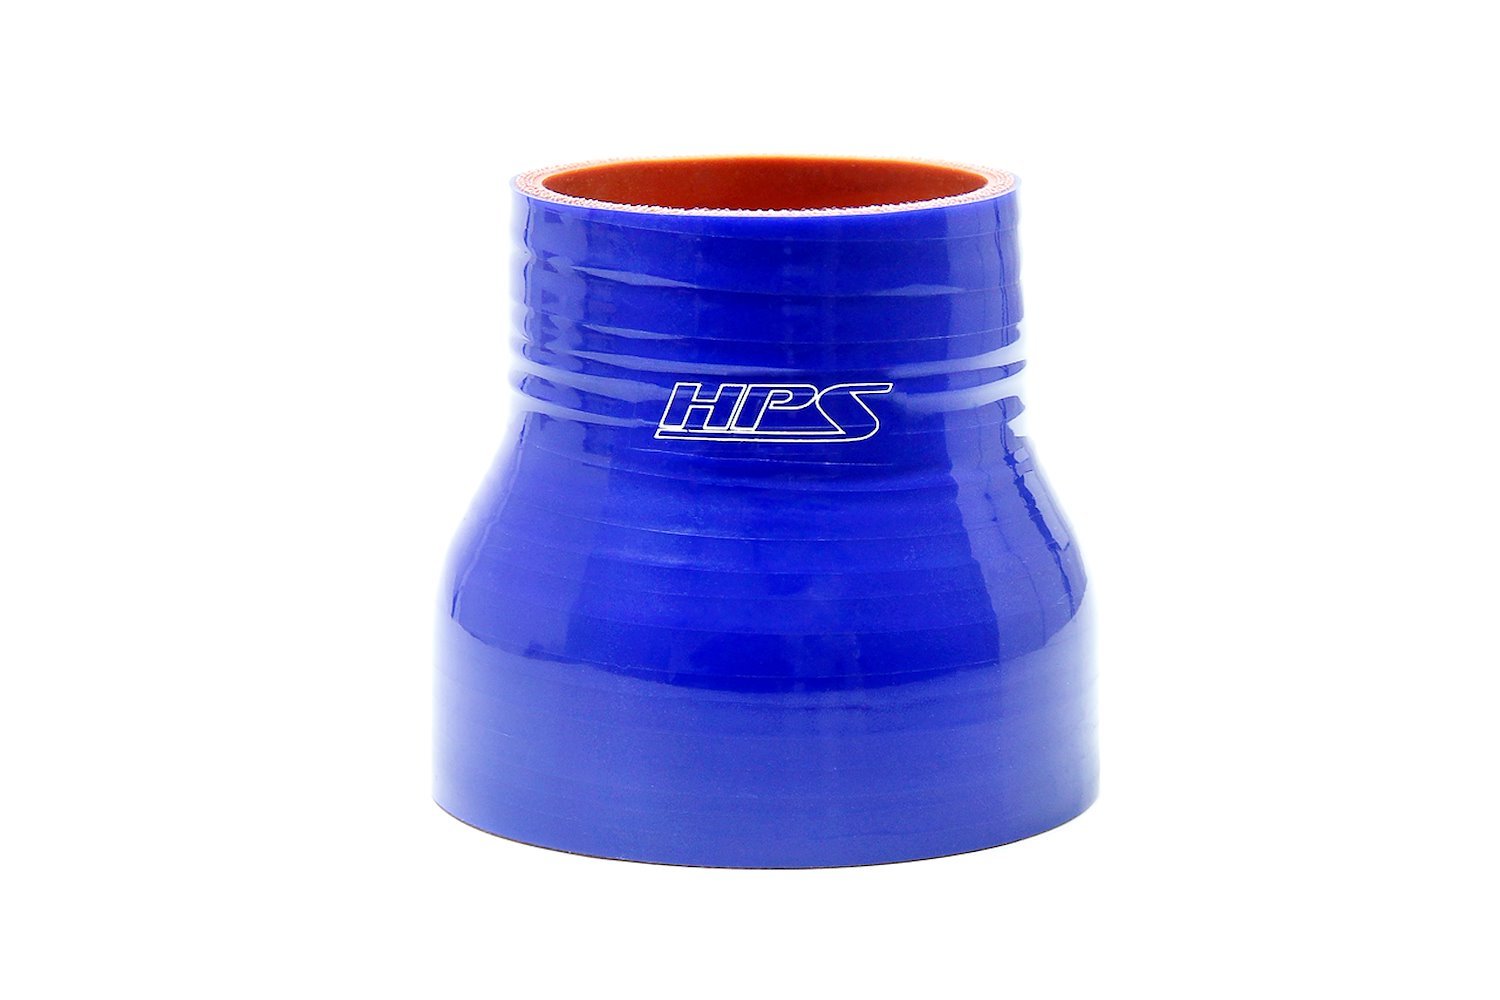 HTSR-300-312-BLUE Silicone Reducer Hose, High-Temp 4-Ply Reinforced, 3 in. - 3-1/8 in. ID, 3 in. Long, Blue